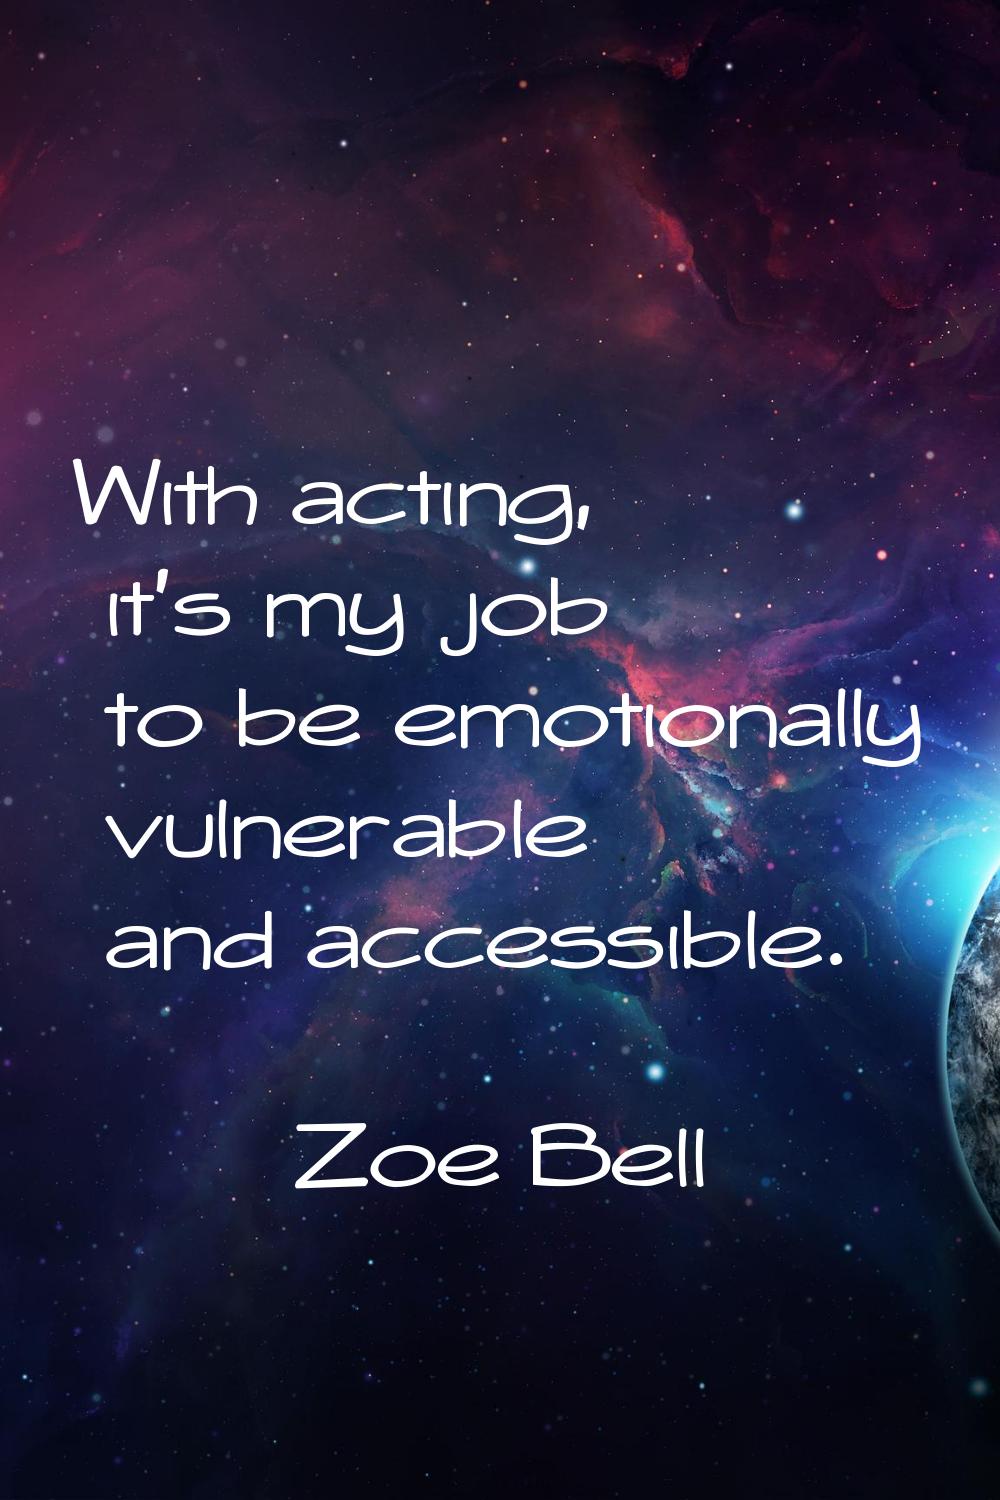 With acting, it's my job to be emotionally vulnerable and accessible.